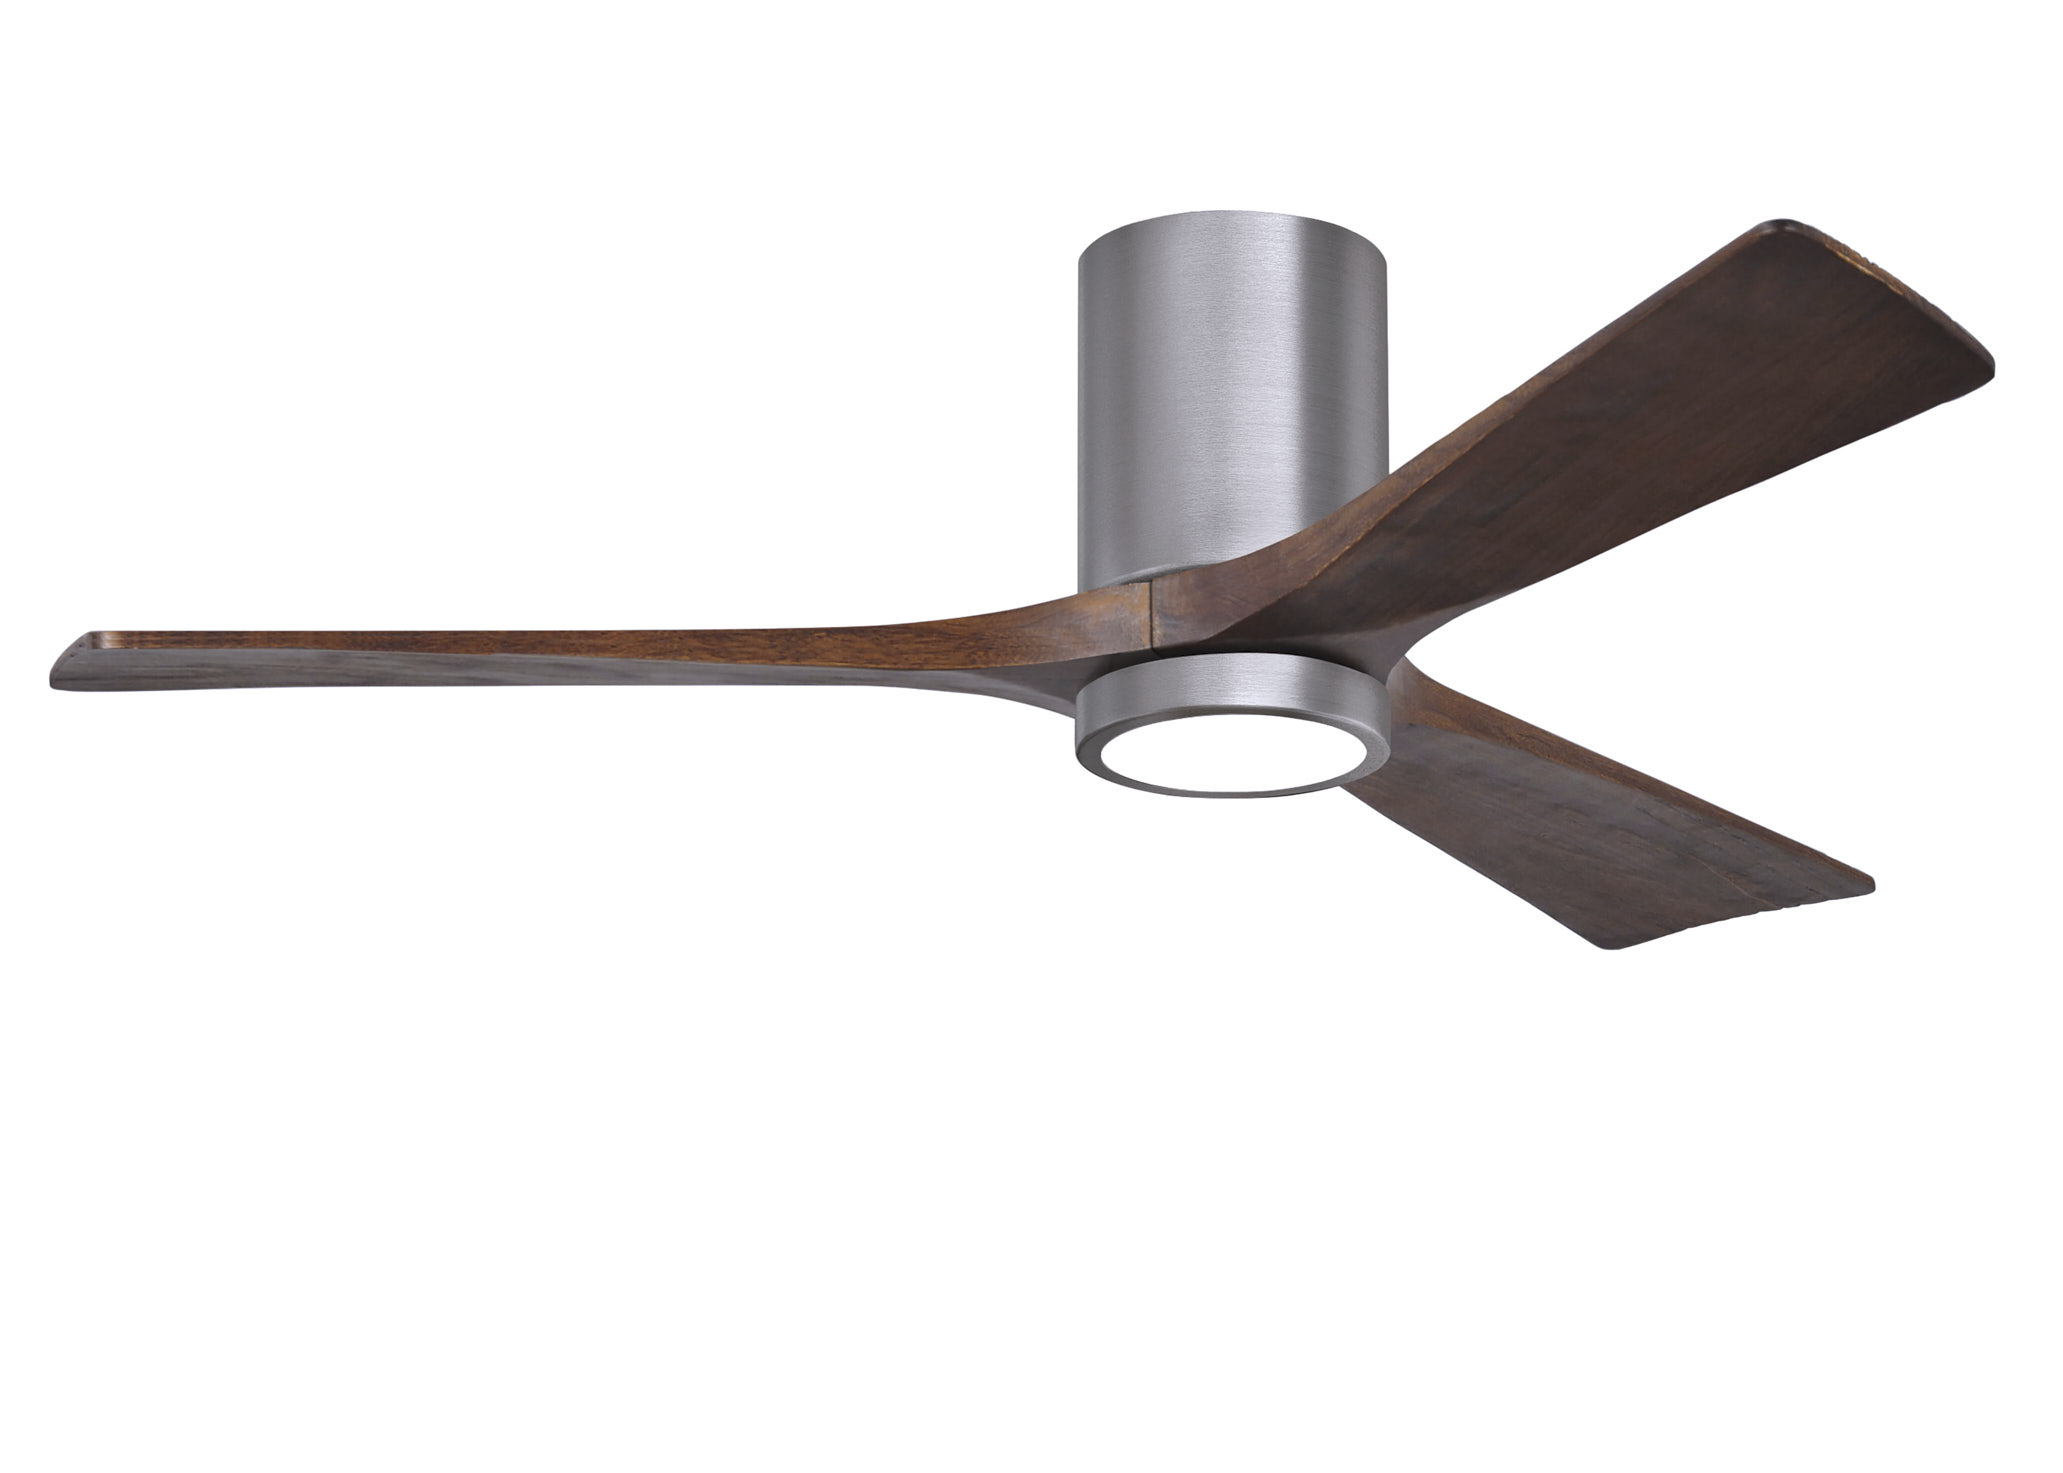 Irene-3HLK 6-speed ceiling fan in brushed pewter finish with 52